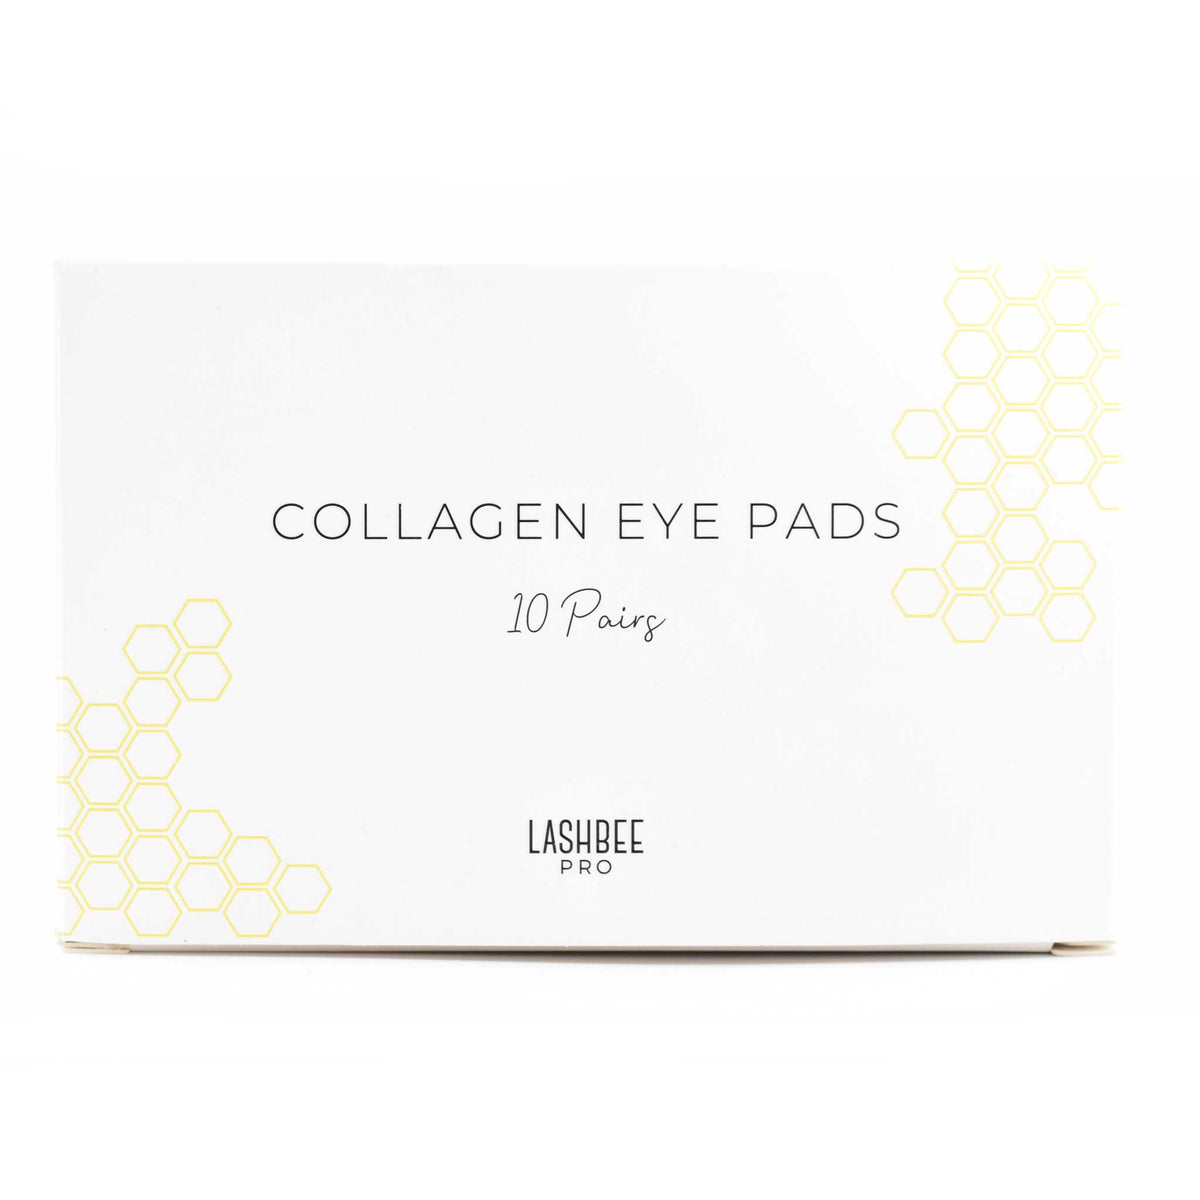 Our hydrating, collagen-infused eye pads add a bit of luxury treatment to any lash service. Perfect for any eye shape, these gentle eye pads protect your client&#39;s eyes from tweezers while simultaneously leaving their skin refreshed and brightened.  The soft gel is non-slip, staying in place even after making adjustments.